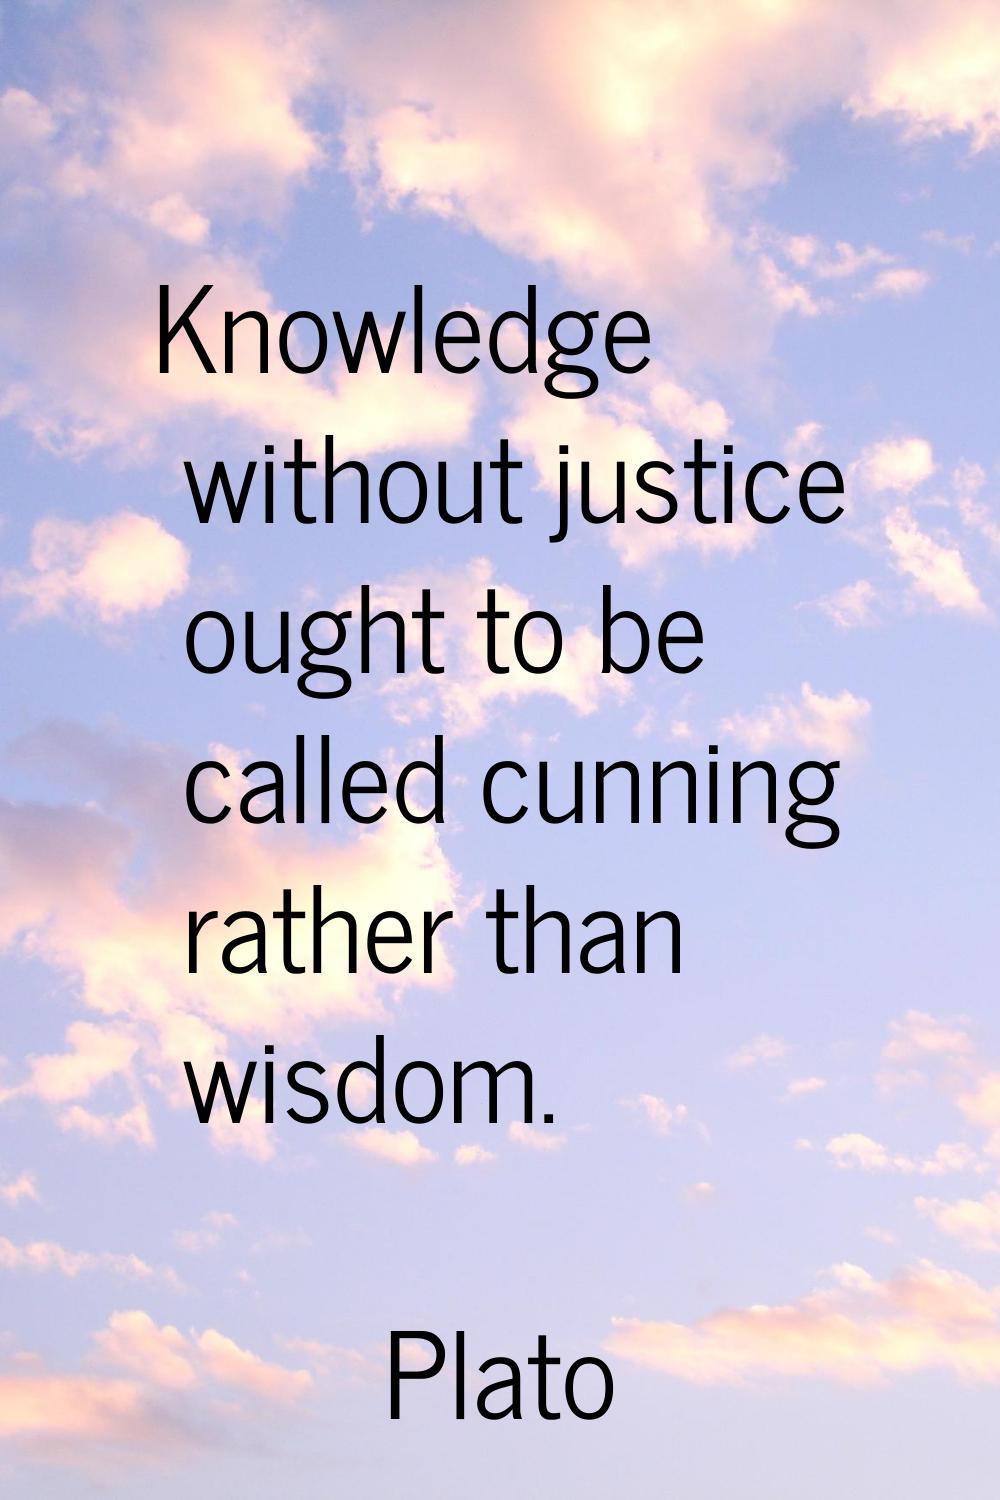 Knowledge without justice ought to be called cunning rather than wisdom.